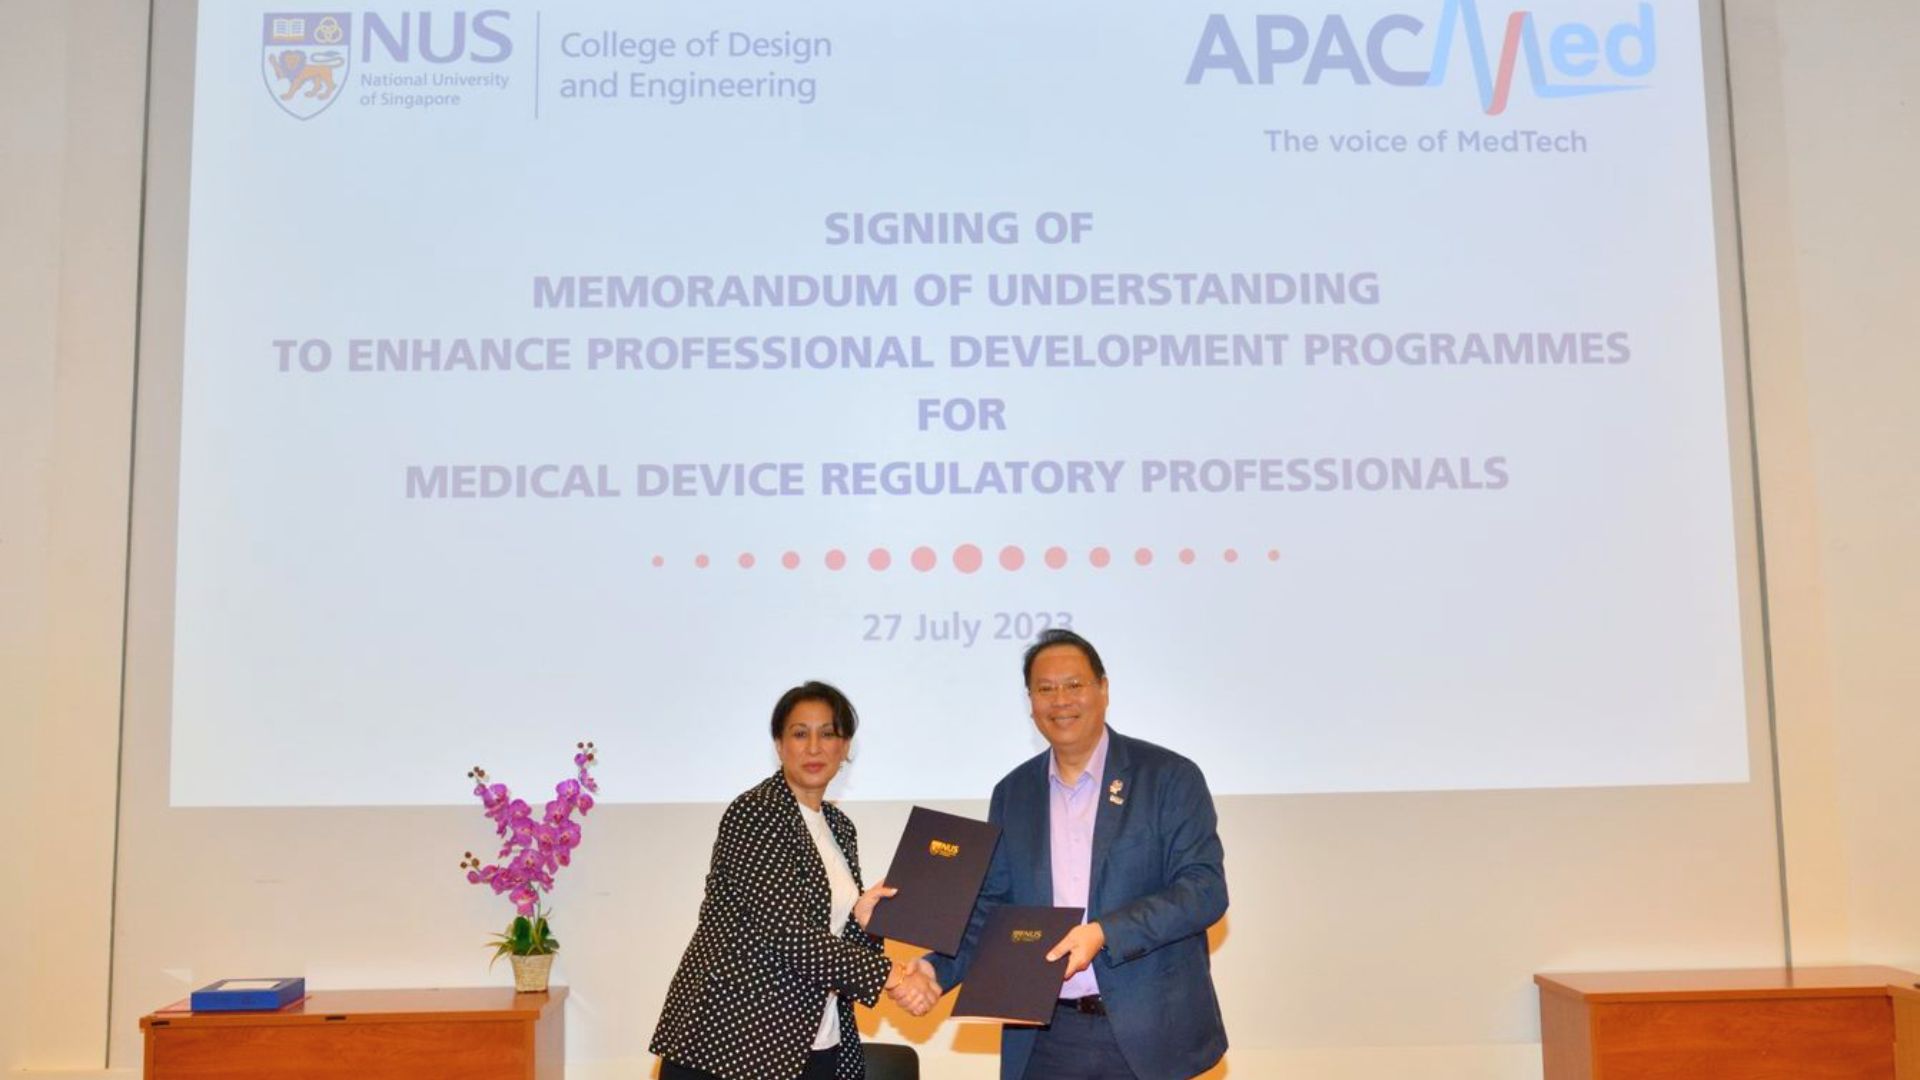 Ms Harjit Gill (CEO APACMed) and Professor Teo Kie Leong (Acting Dean CDE) at the signing of the MOU